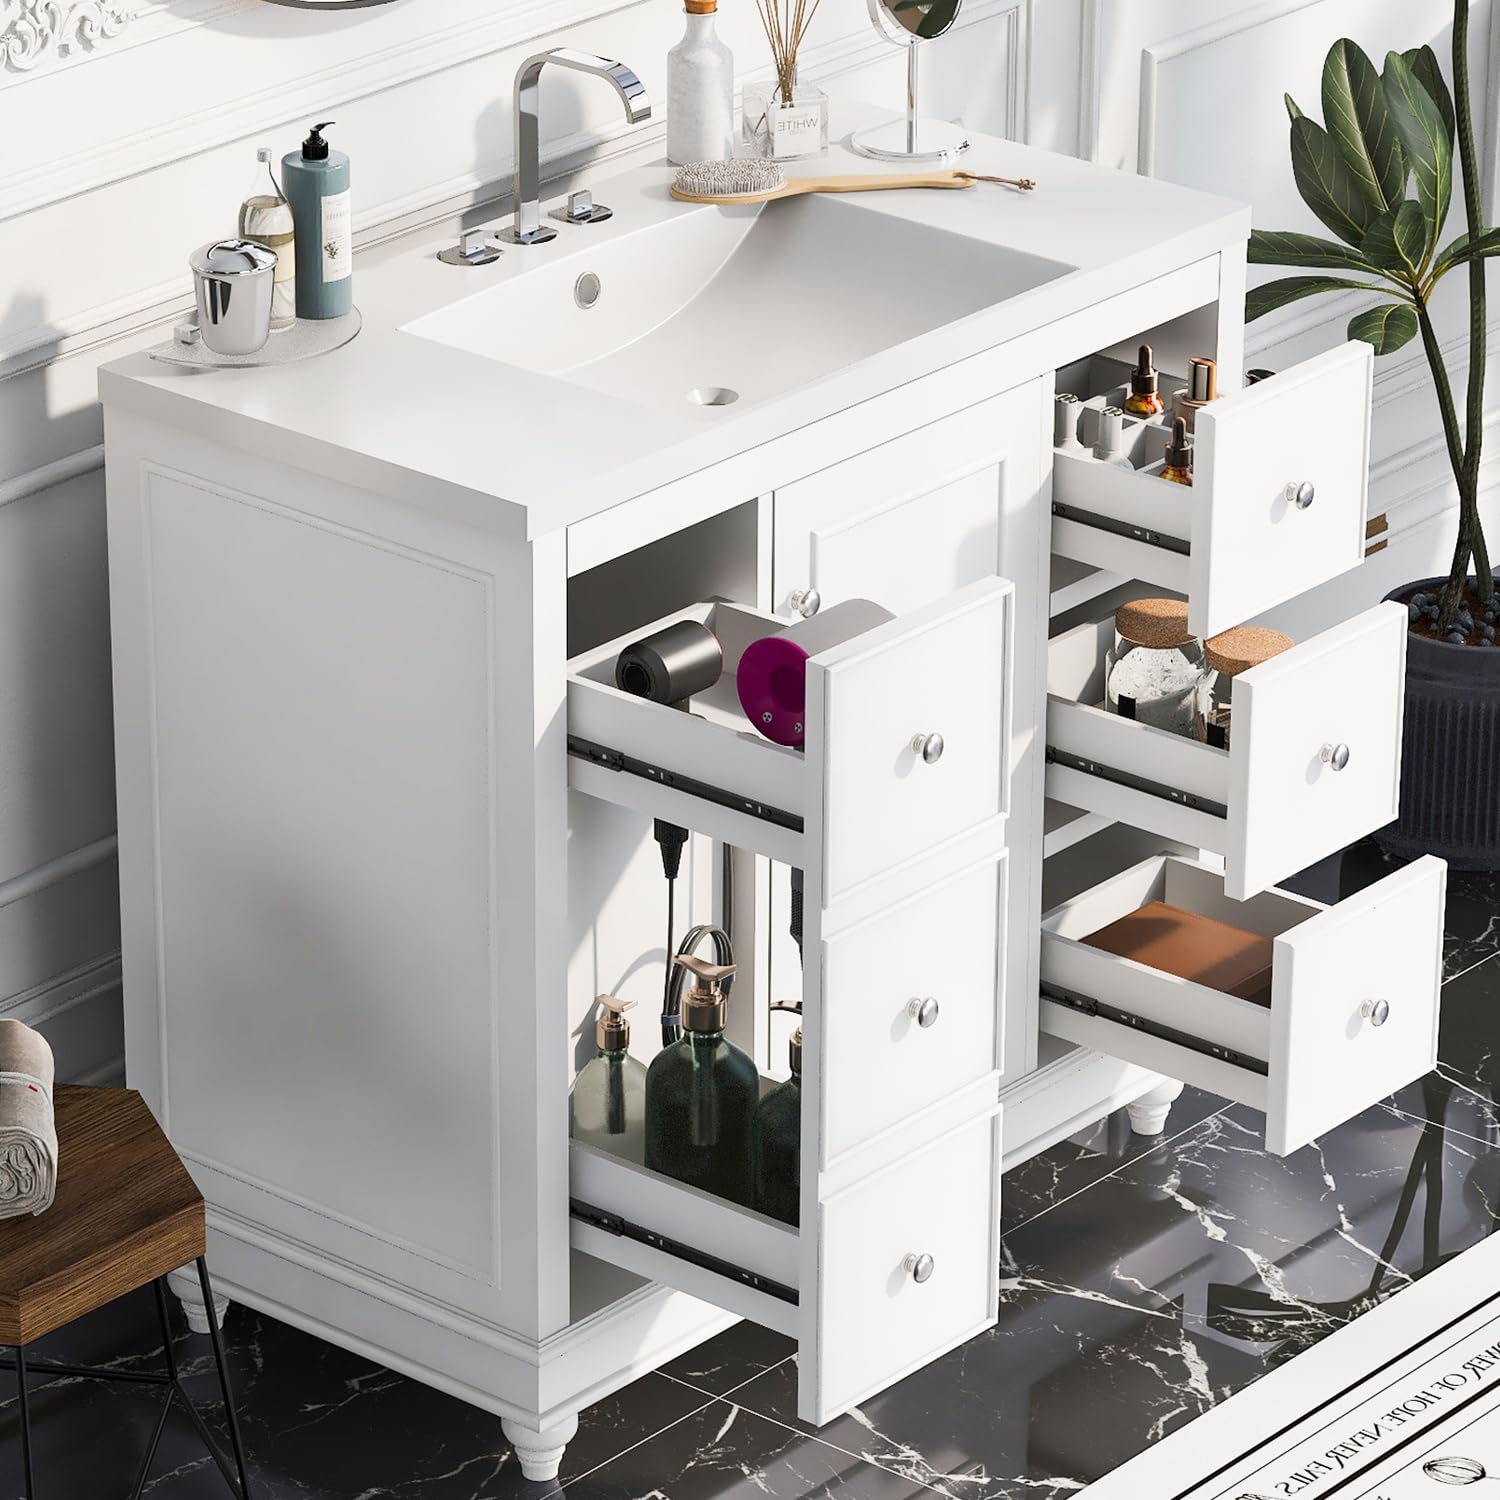 Lostcat 36inch Bathroom Vanity with Undermount Sink,Resin Basin,with Door and 4 Drawers,with Adjustable Shelves,Easy Assembly,Multipurpose Storage Bath Vanity(White)